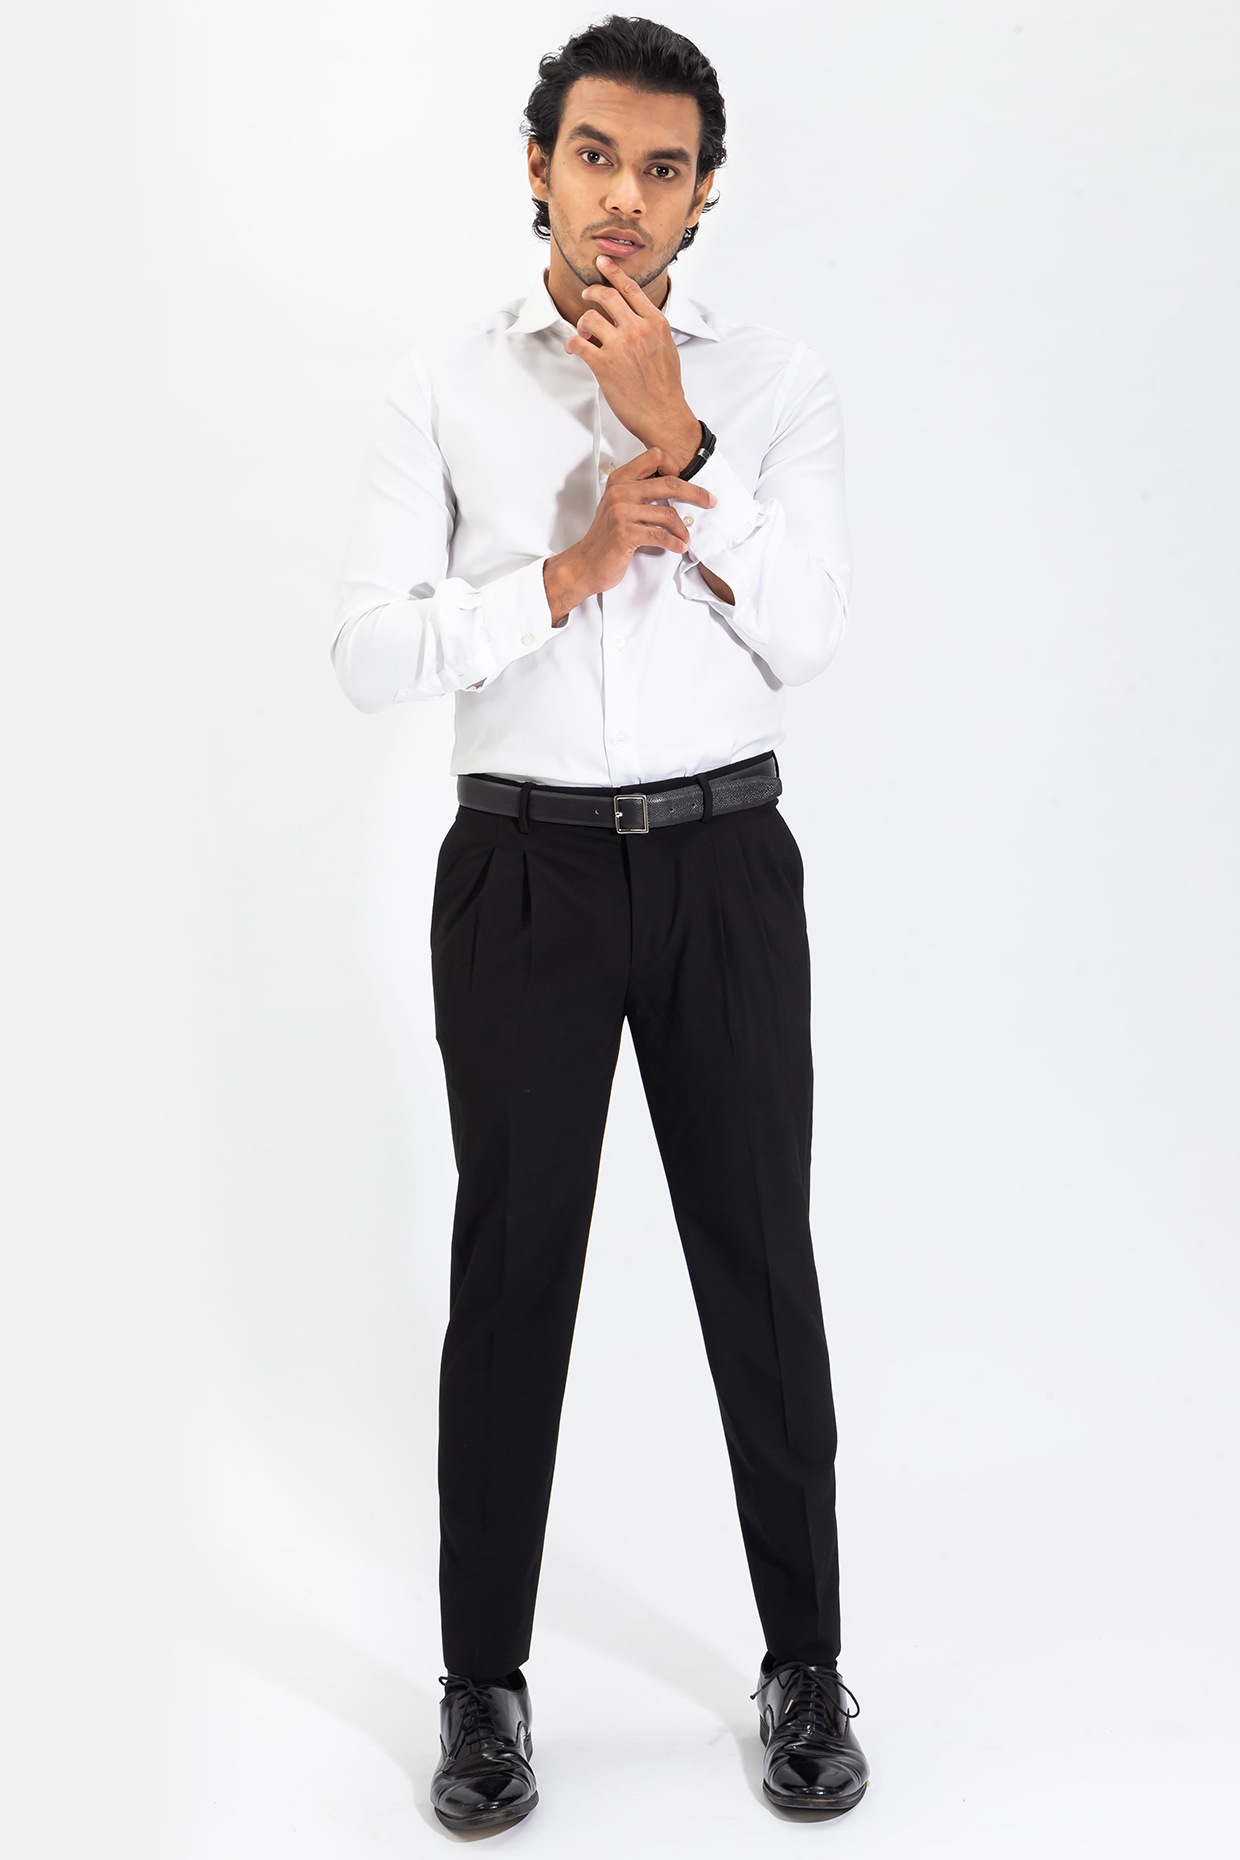 Black Solid Men Twill Trouser, Slim Fit, Size: XL at best price in Surat